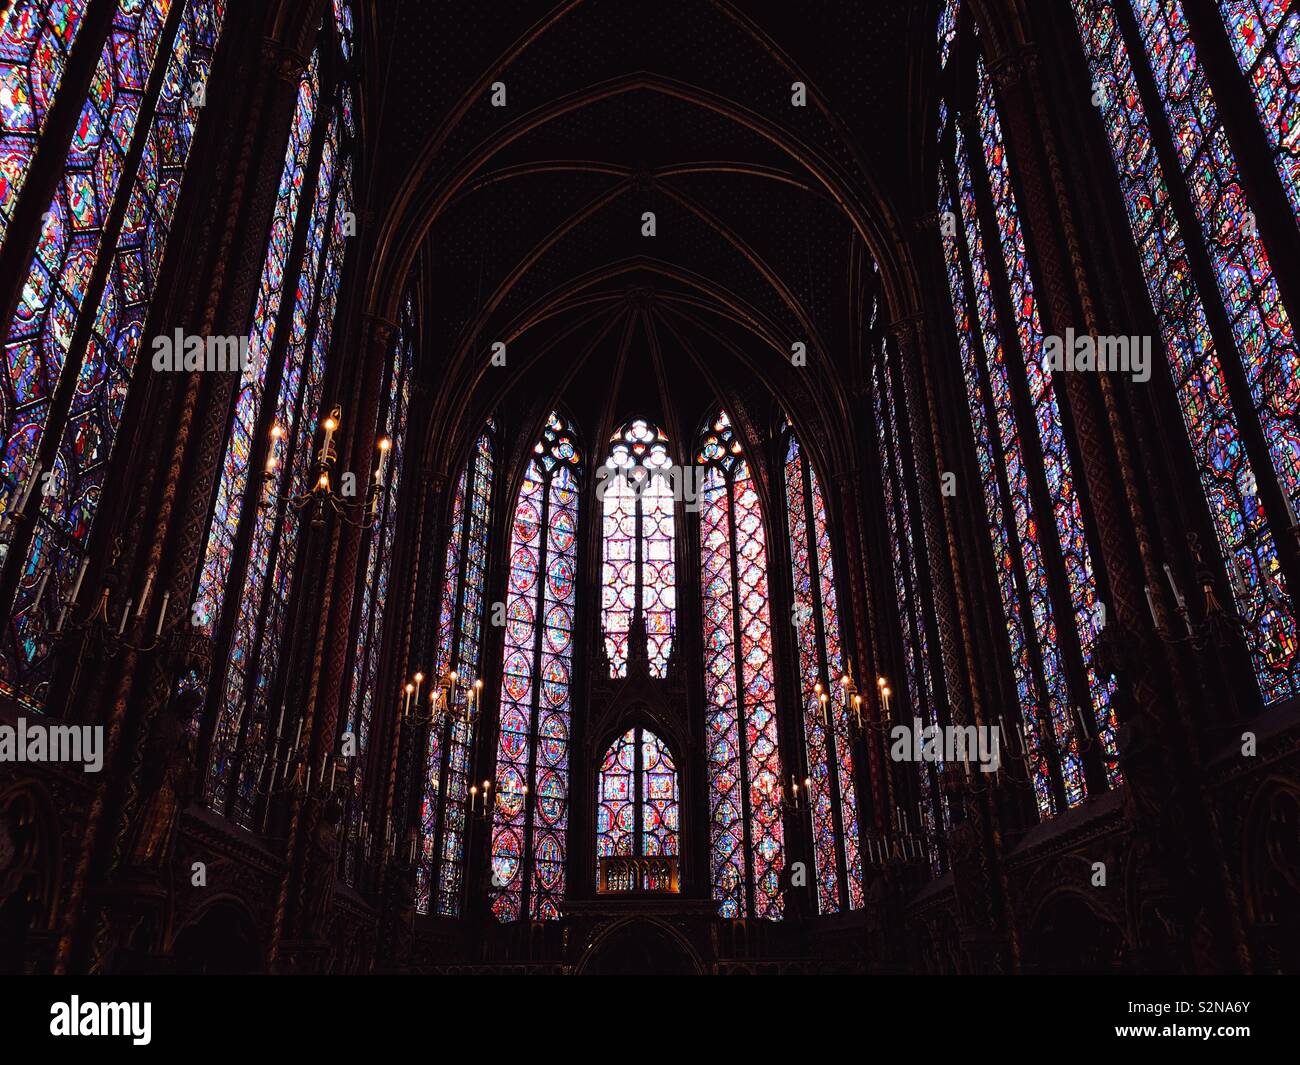 Interior of magnificent Sainte Chapelle, a royal chapel in the Gothic style, within the medieval Palais de la Cité, the residence of the Kings of France Stock Photo